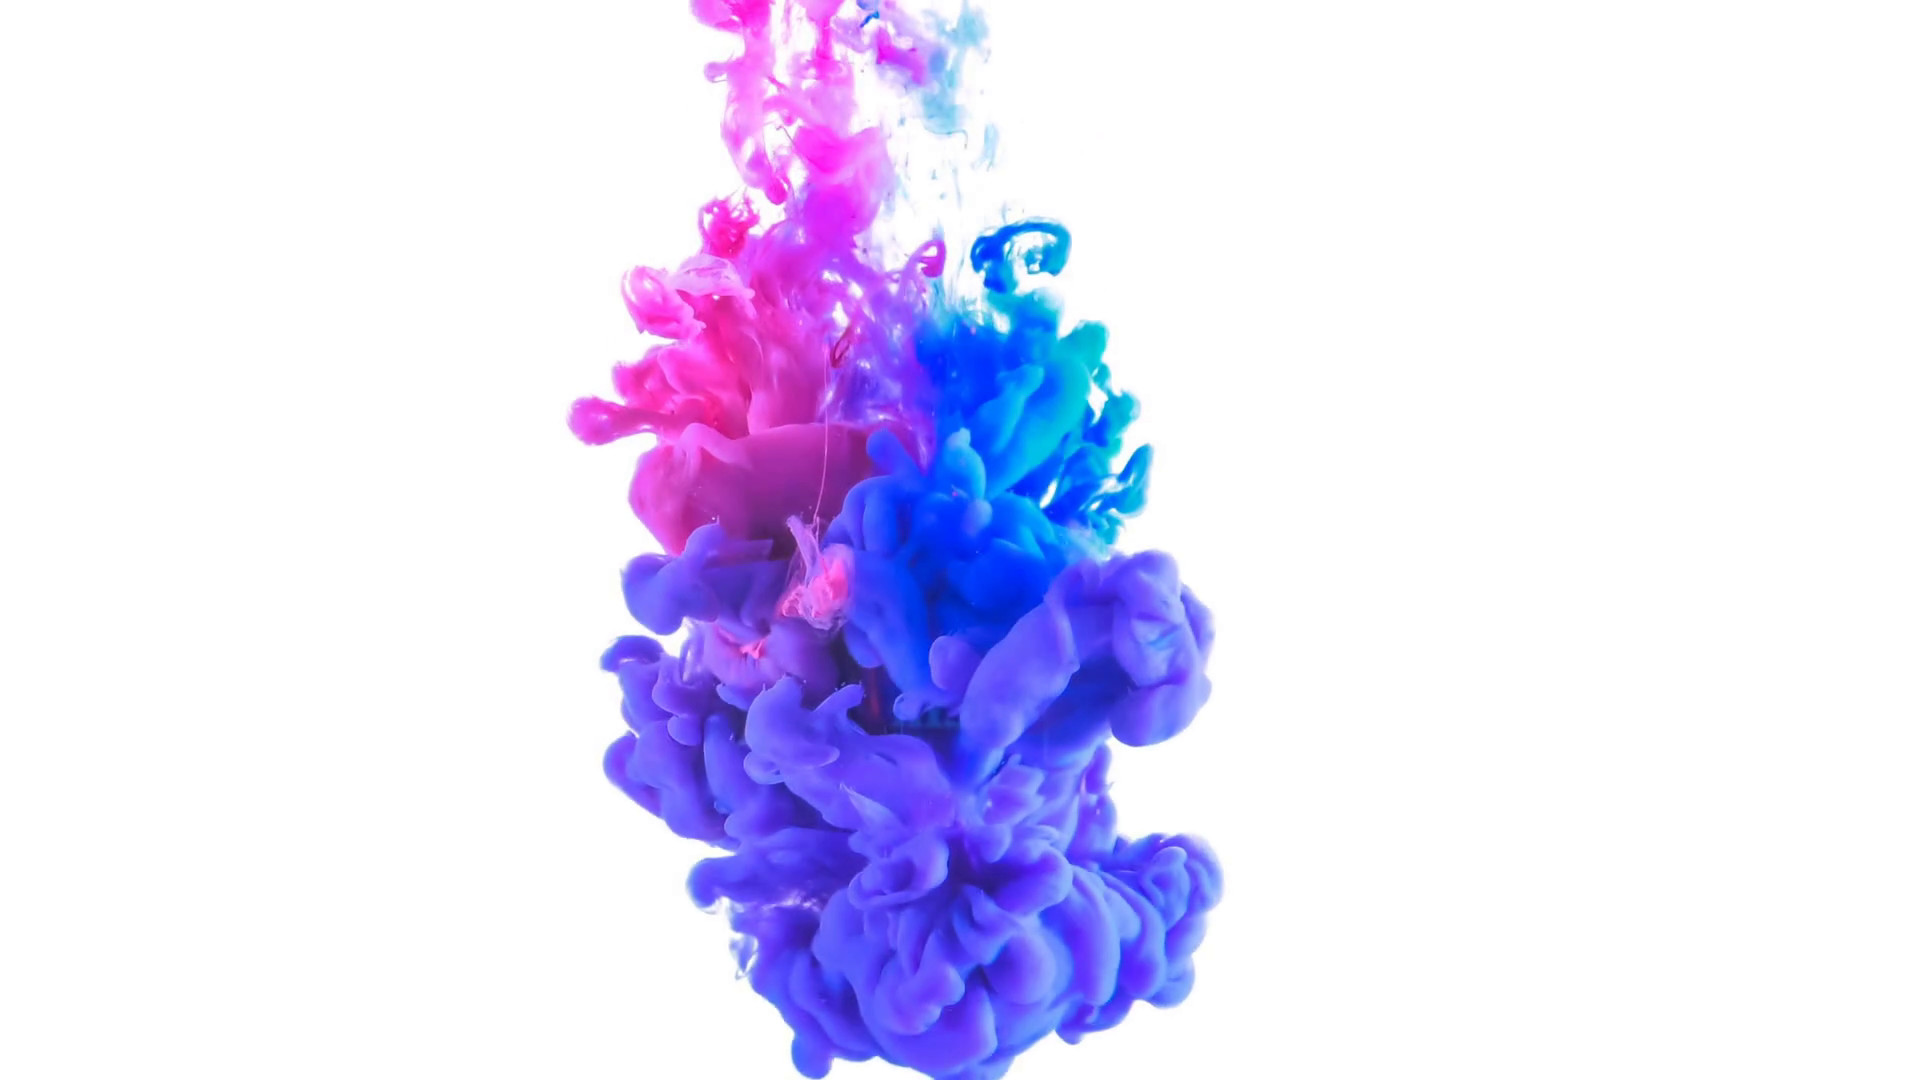 1920x1080 Blue, pink and purple ink cloud forming on white background